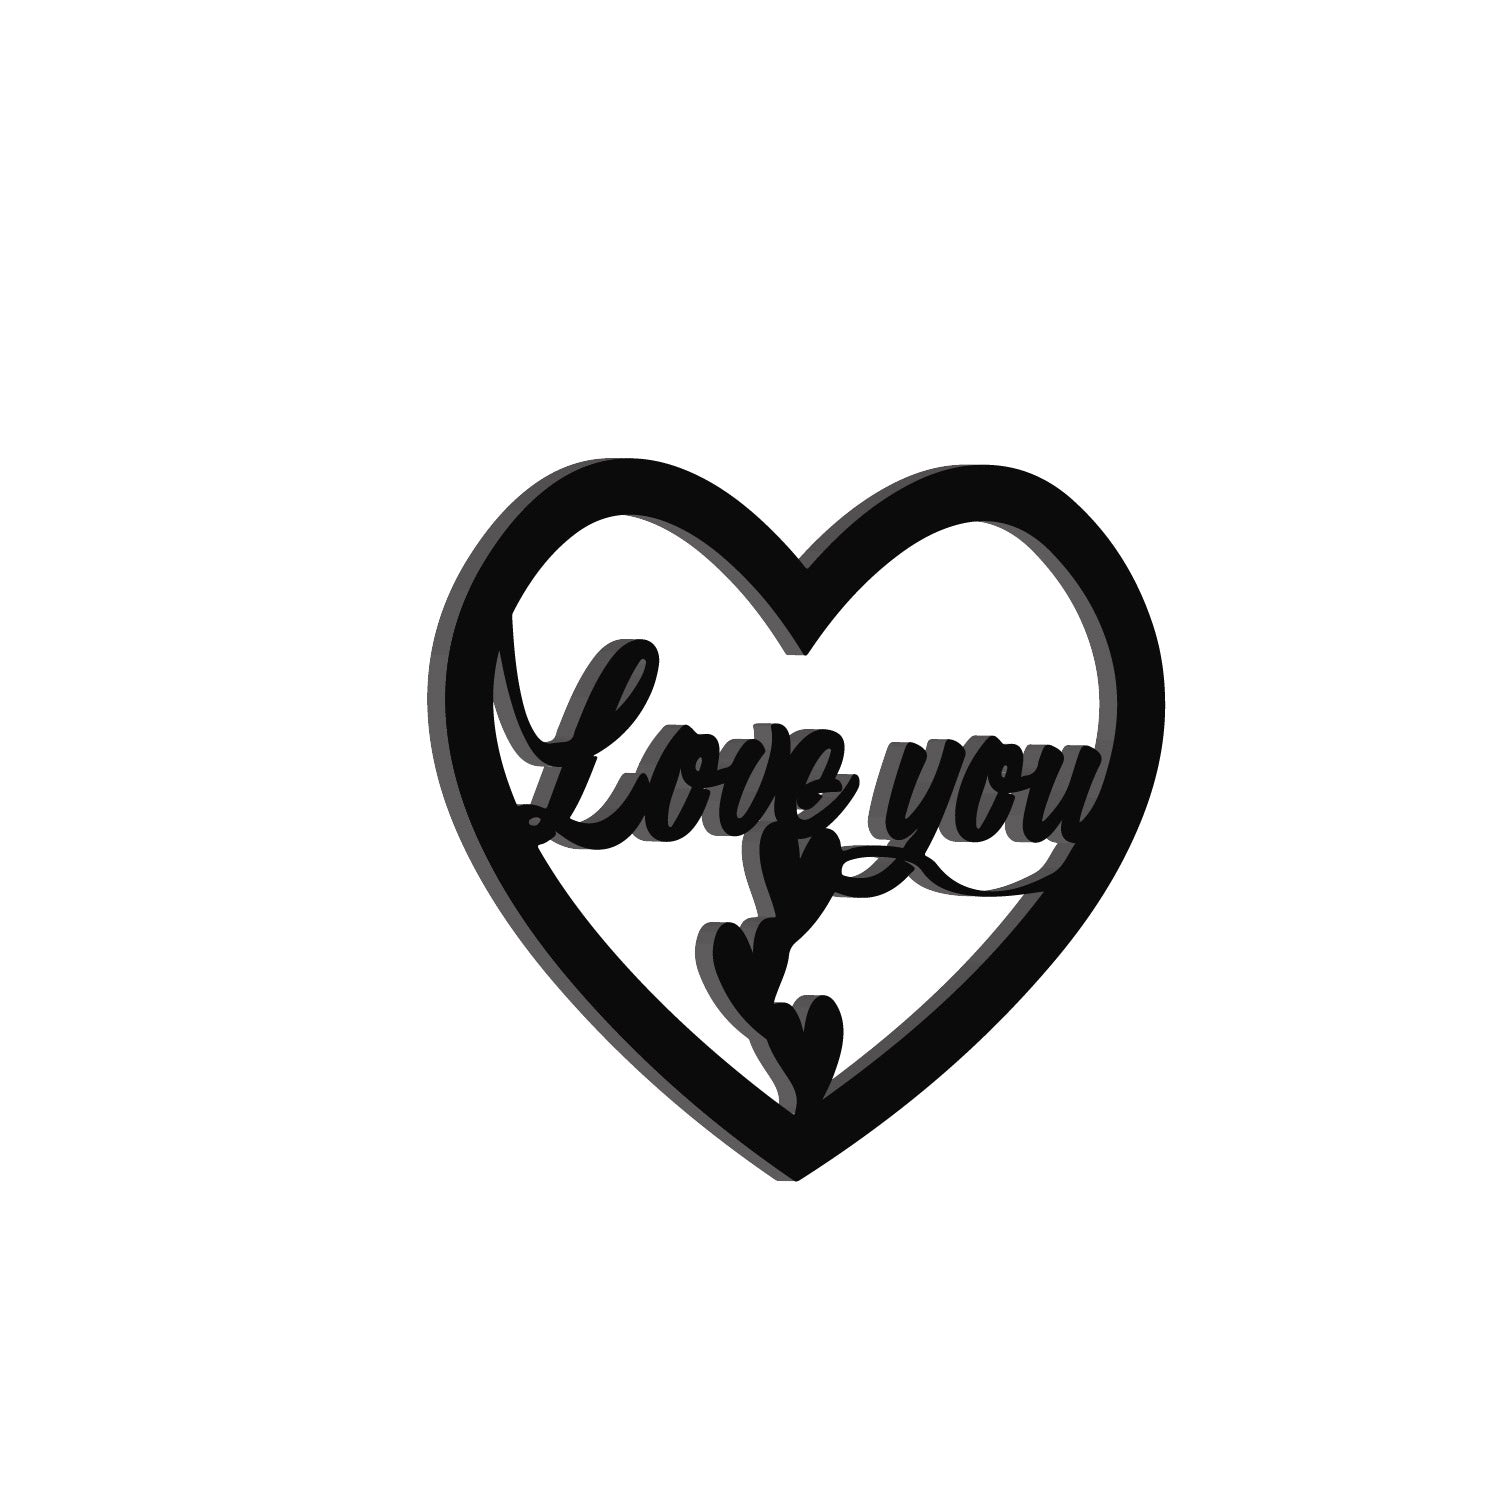 "Love You with Hearts" Black Engineered Wood Wall Art Cutout, Ready to Hang Home Decor 4